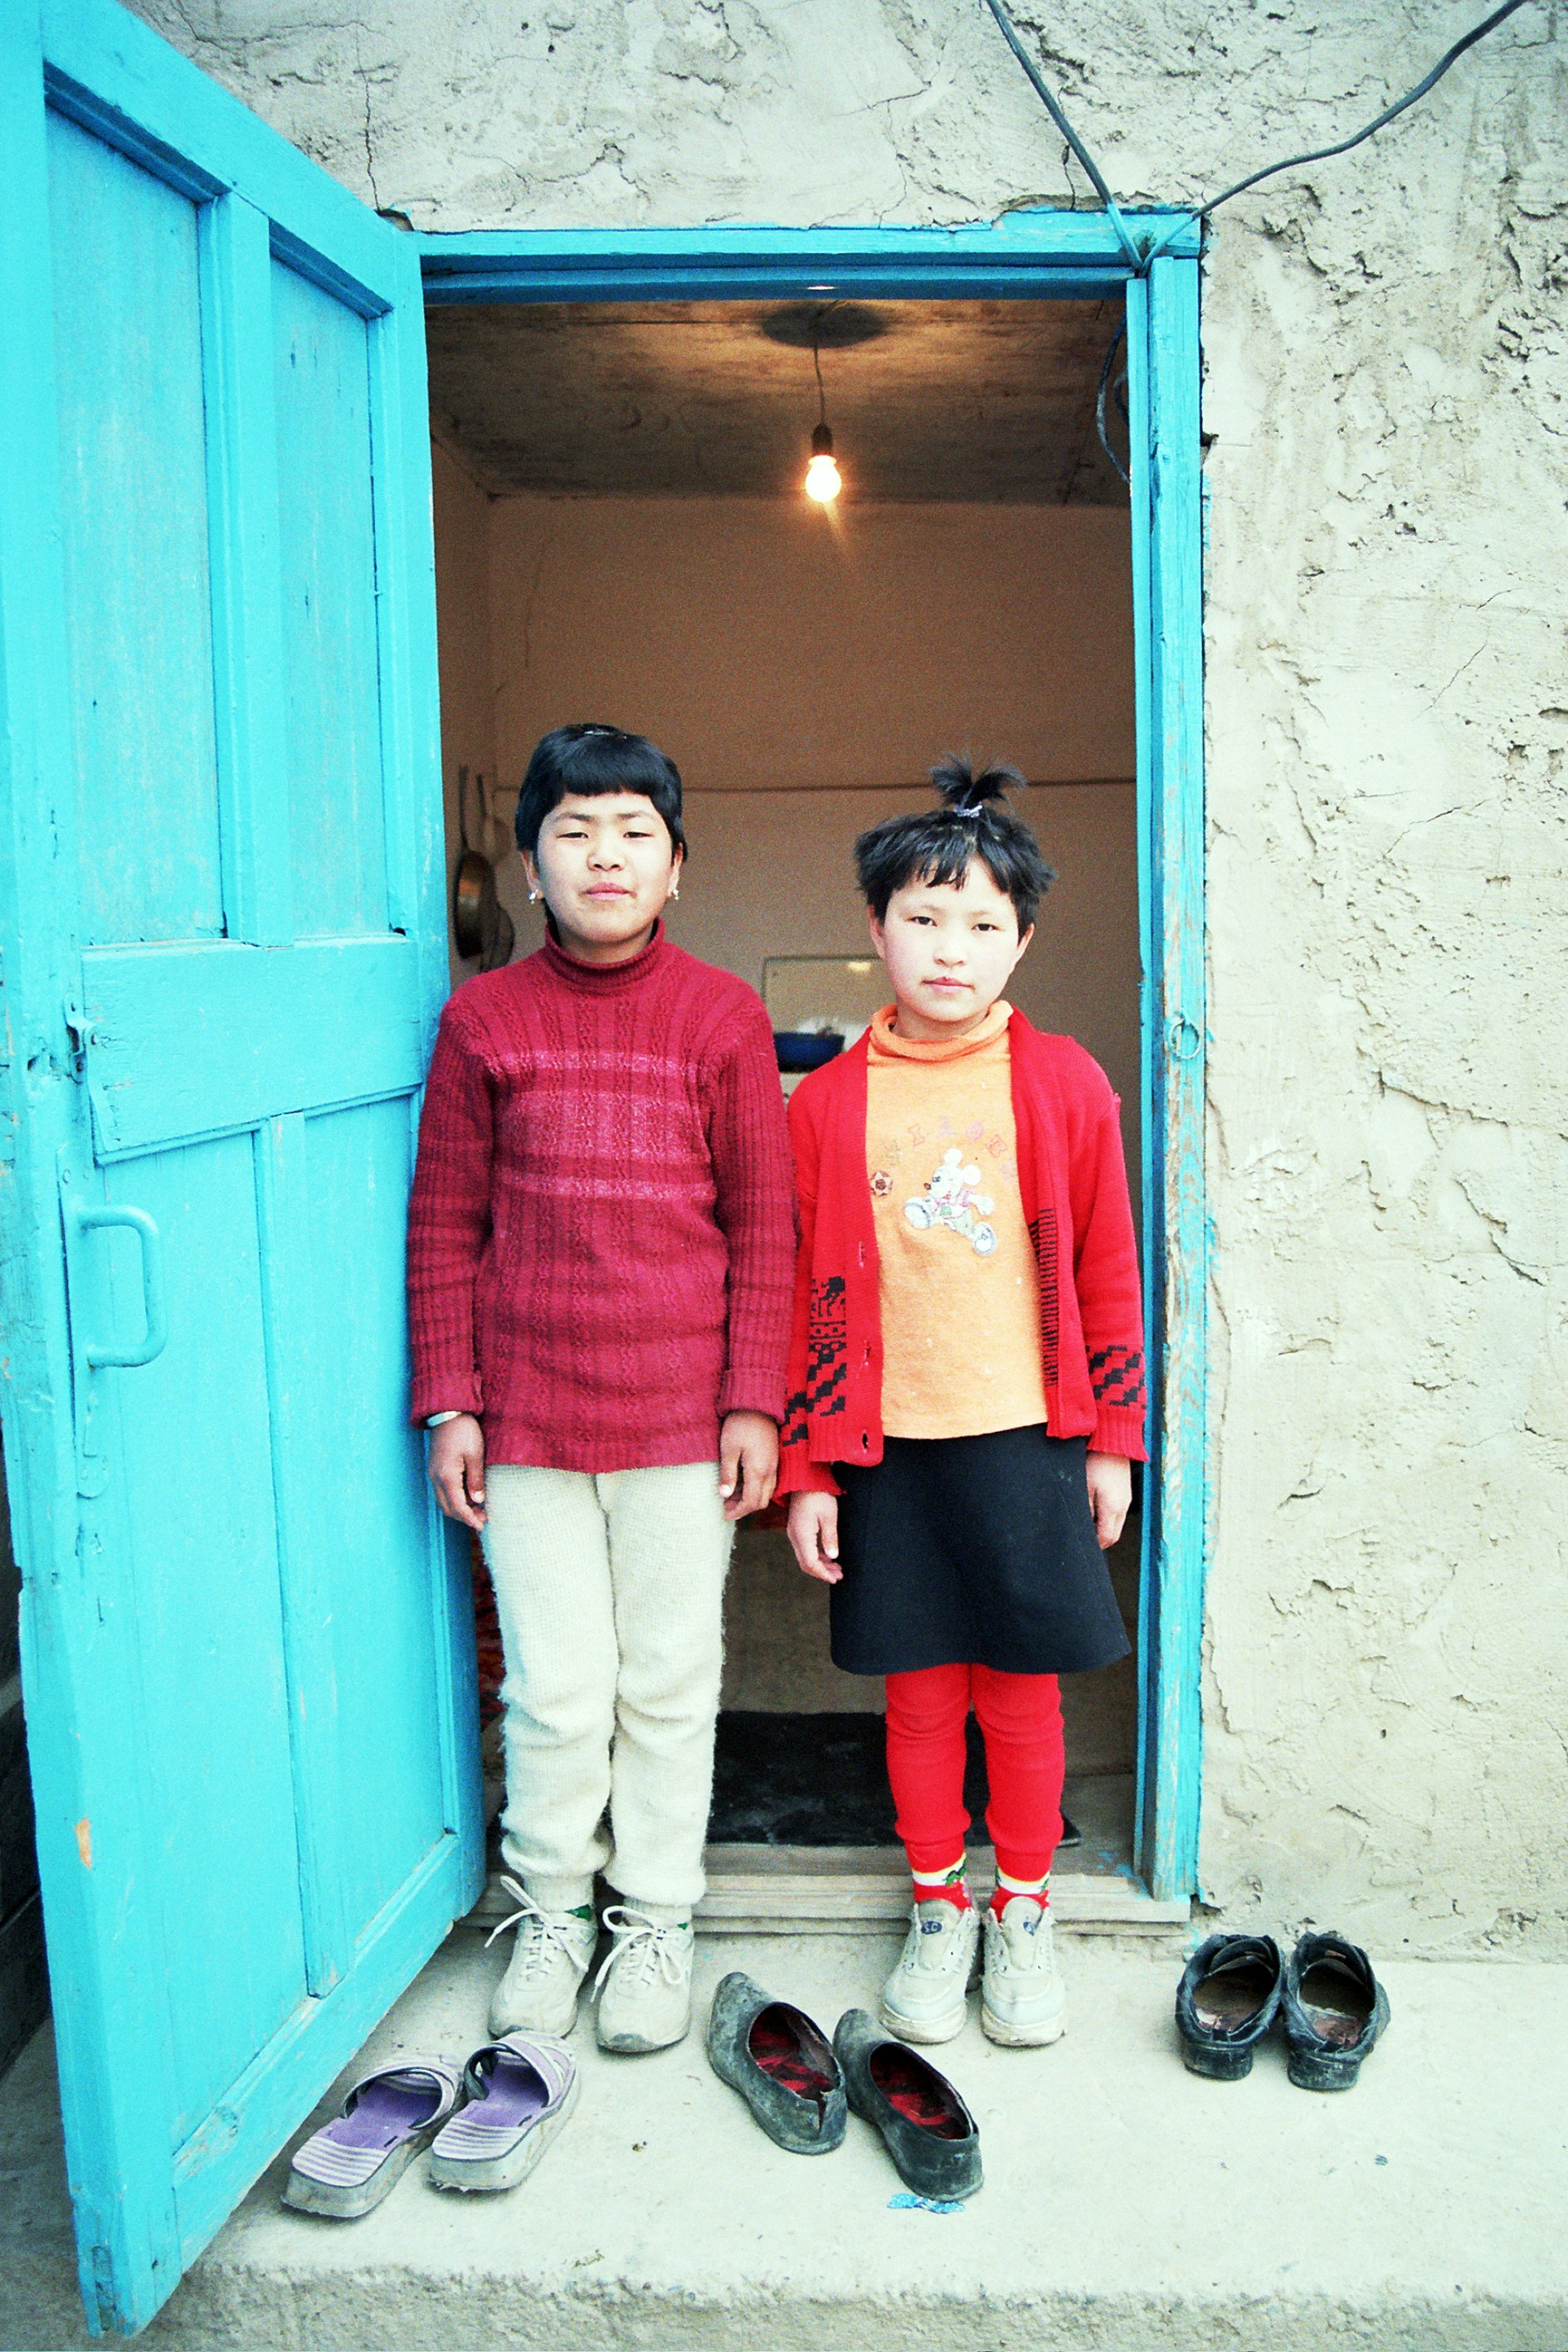 Two children standing in a blue doorway in front of three pairs of shoes.